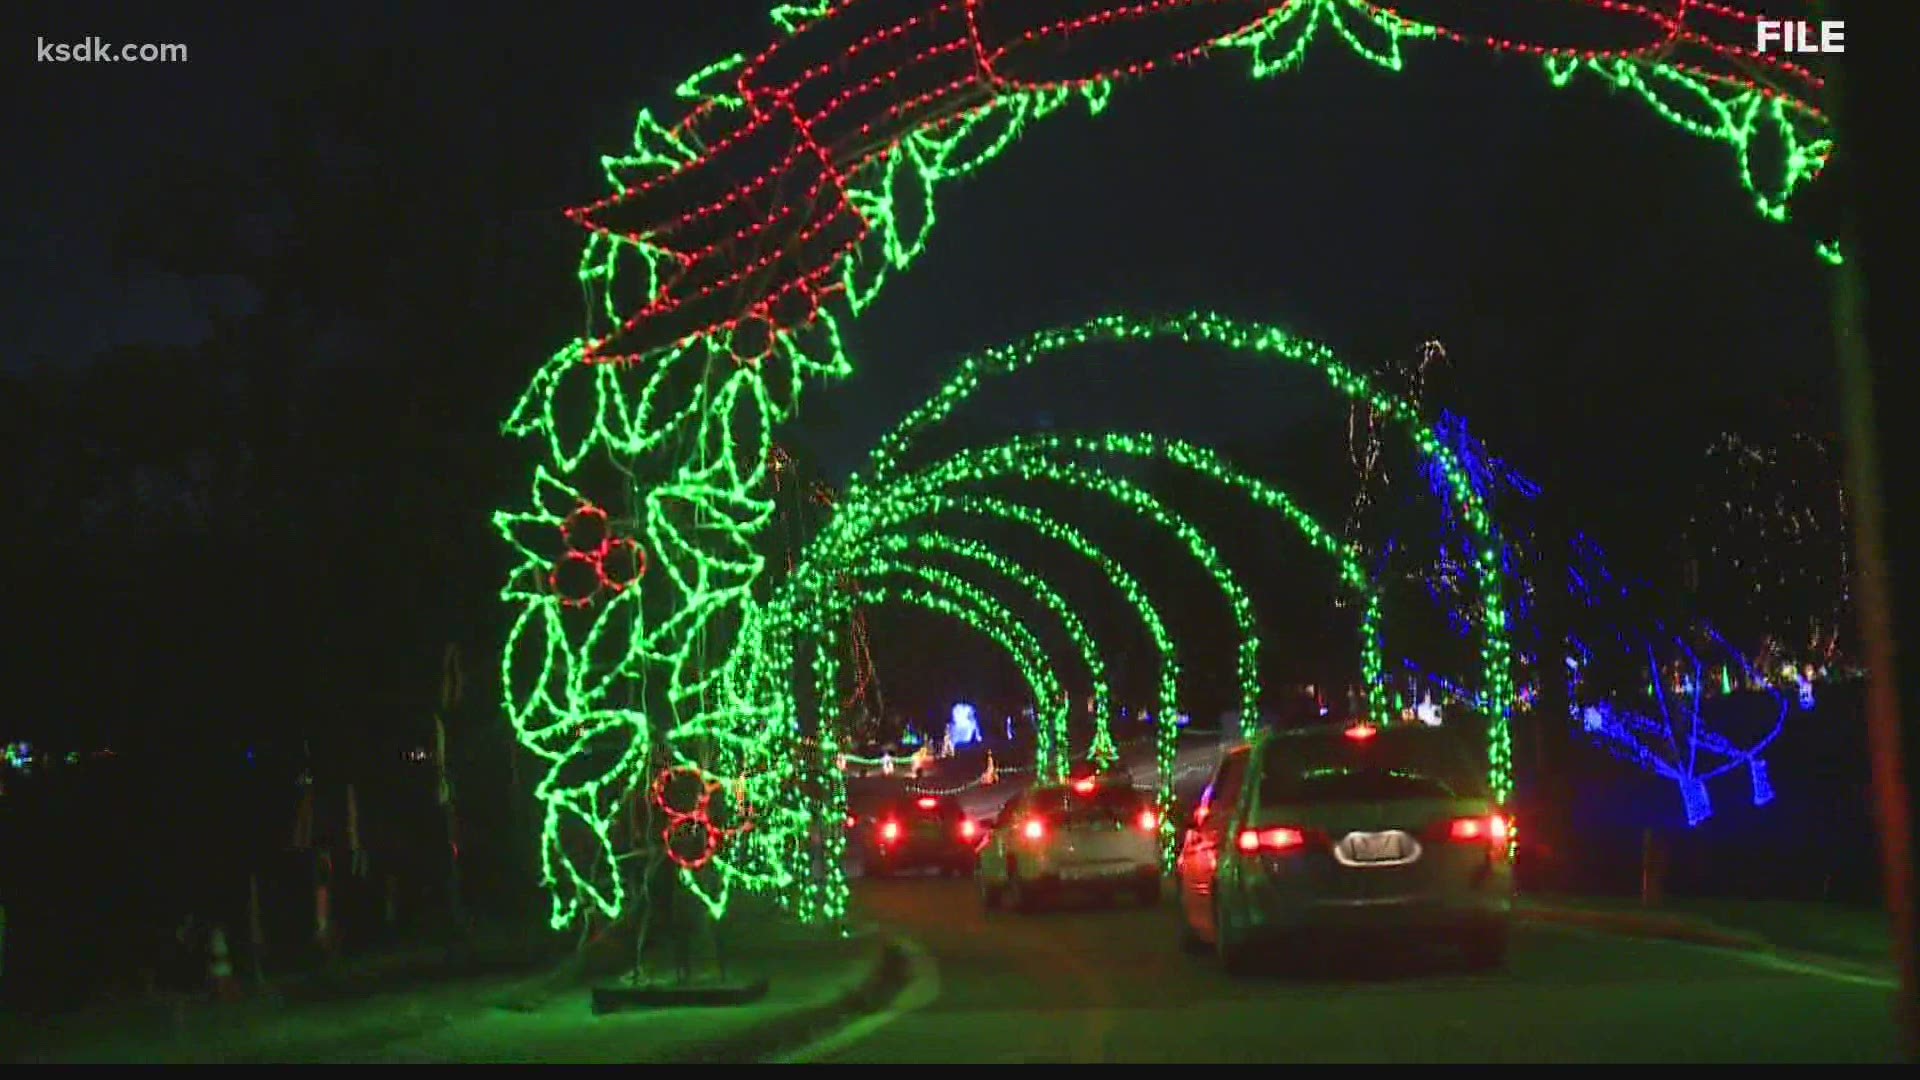 Winter Wonderland will still be open to vehicles and carriage rides this holiday season